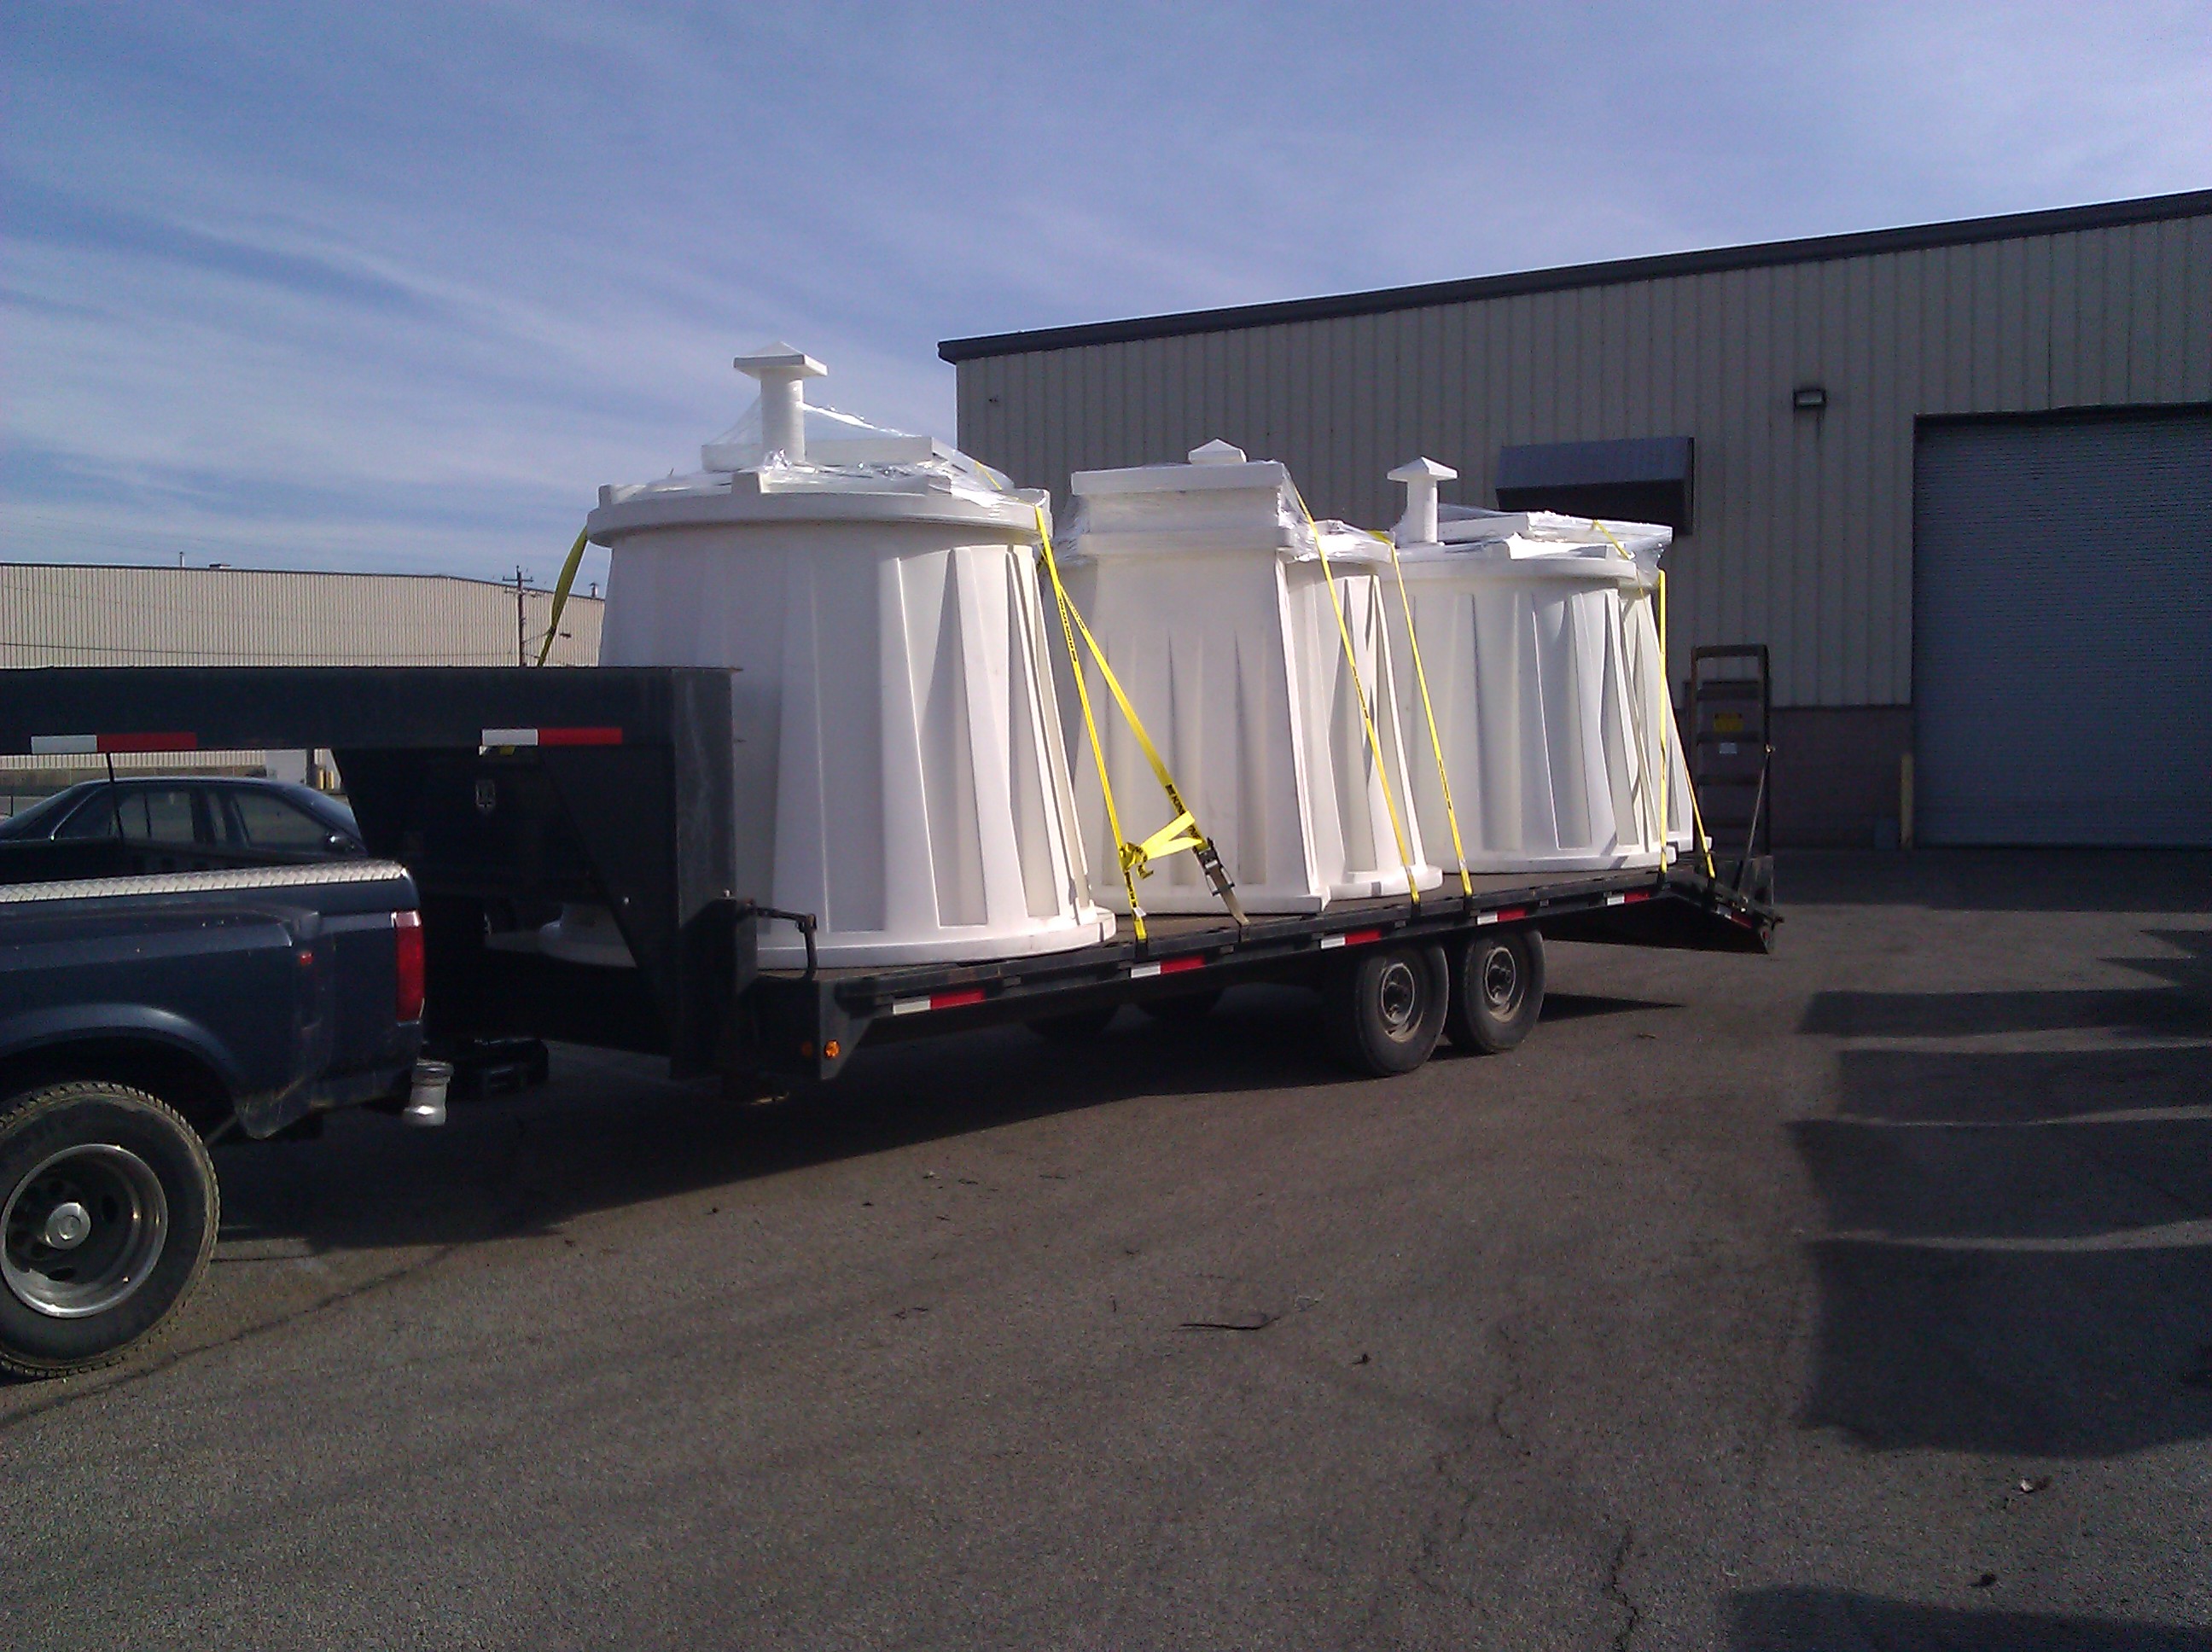 Tornado Shelters Being Picked Up, Tornado Shelter Dealers, OK Tornado Shelter Dealers